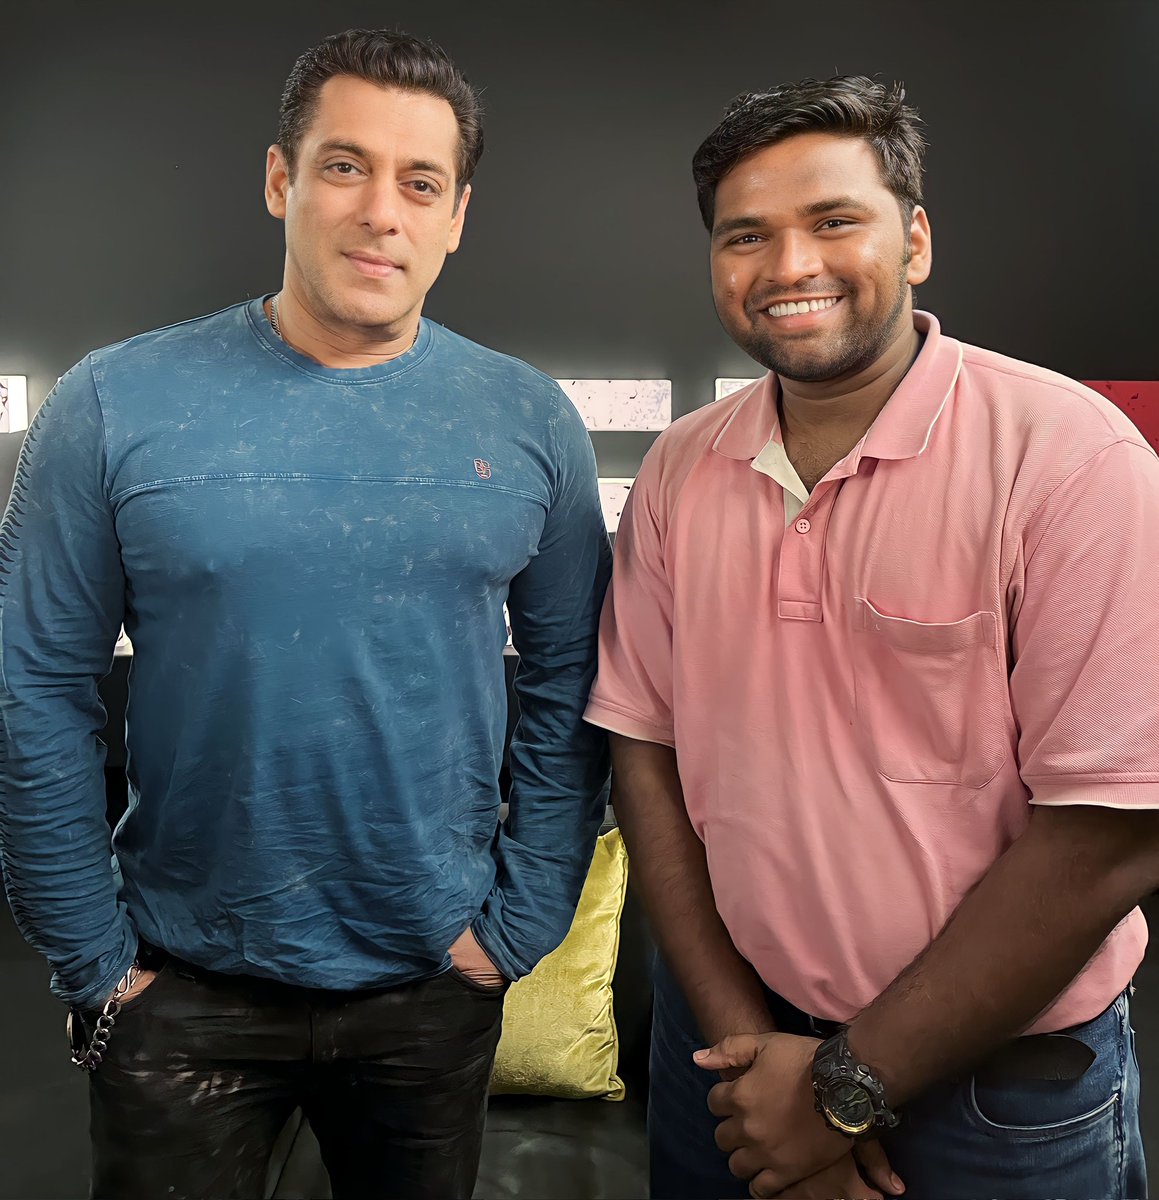 Wishing Very Happy Birthday to #TigerOfBollywood @BeingSalmanKhan Bhaijan, Golden Hearted Man, May God Bless & Multiply the fruits of your hands & Bless you with Great Health, Have a Blockbuster year as always #BhaiKaBirthday #SalmanKhan #SalmanKhanBDayCDP #SalmanaKhan